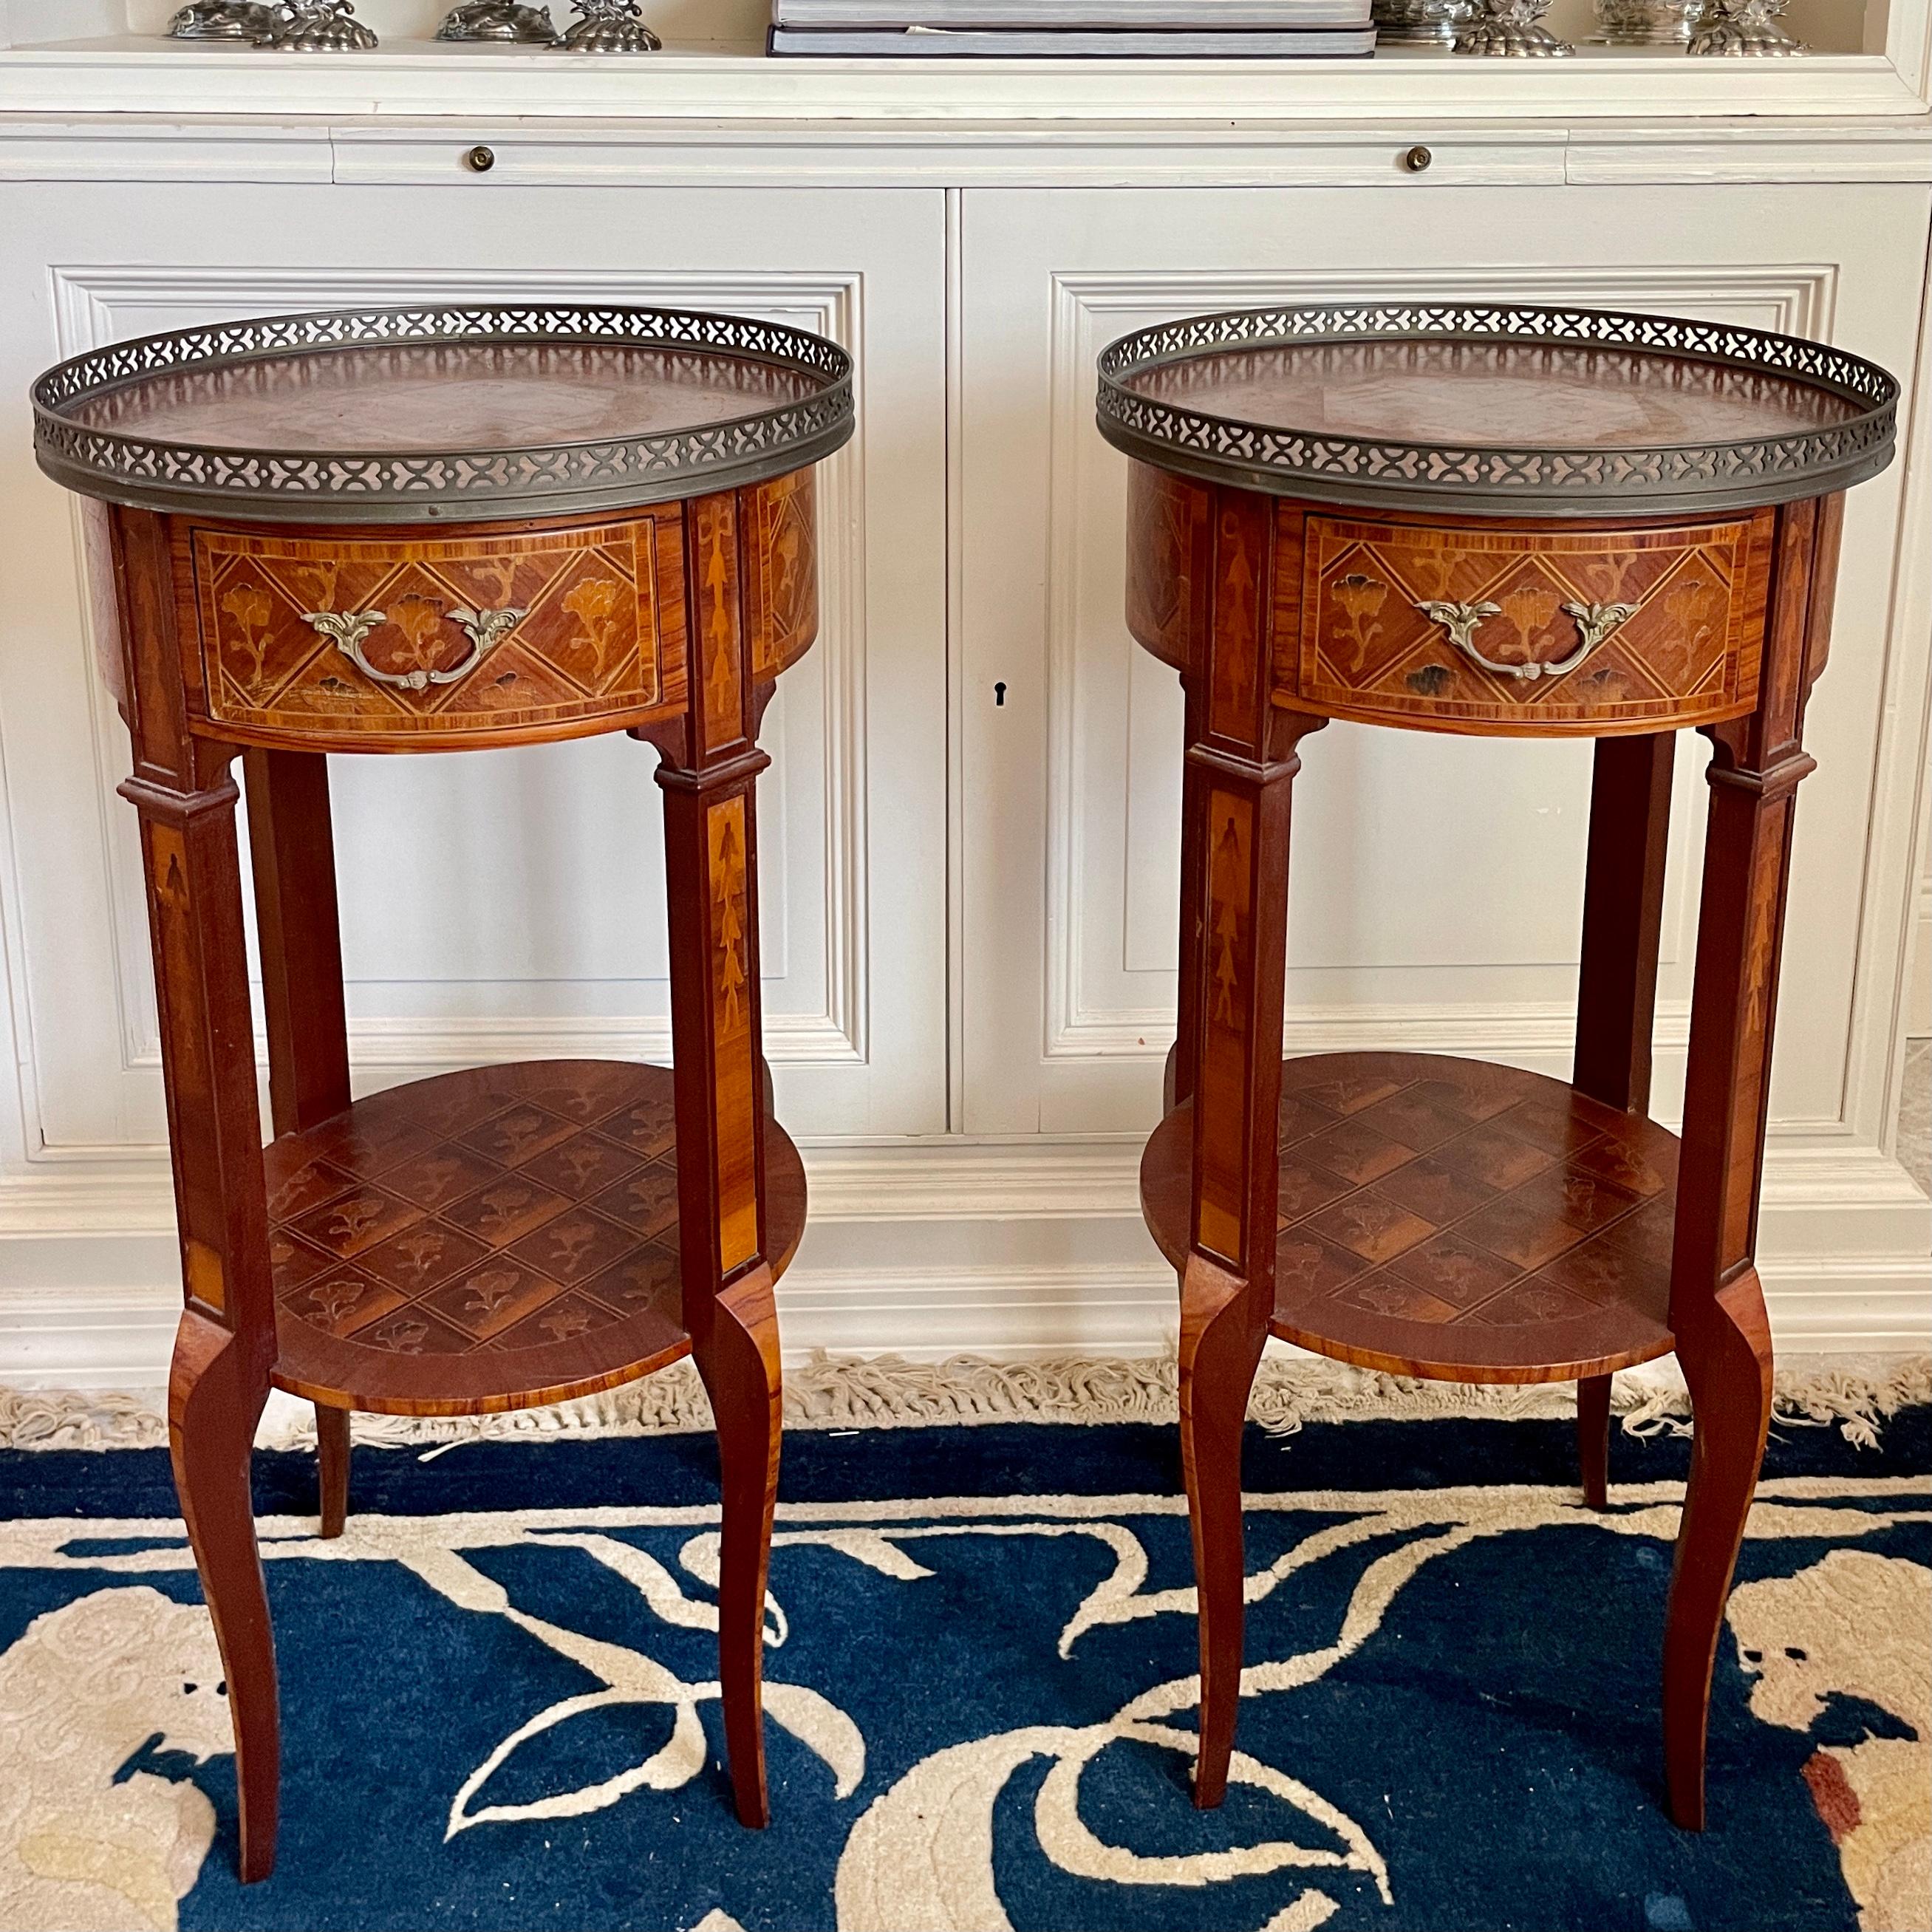 Beautiful pair of transition round top side tables from France. Great marquetry details. Nice addition to your French chic interiors.